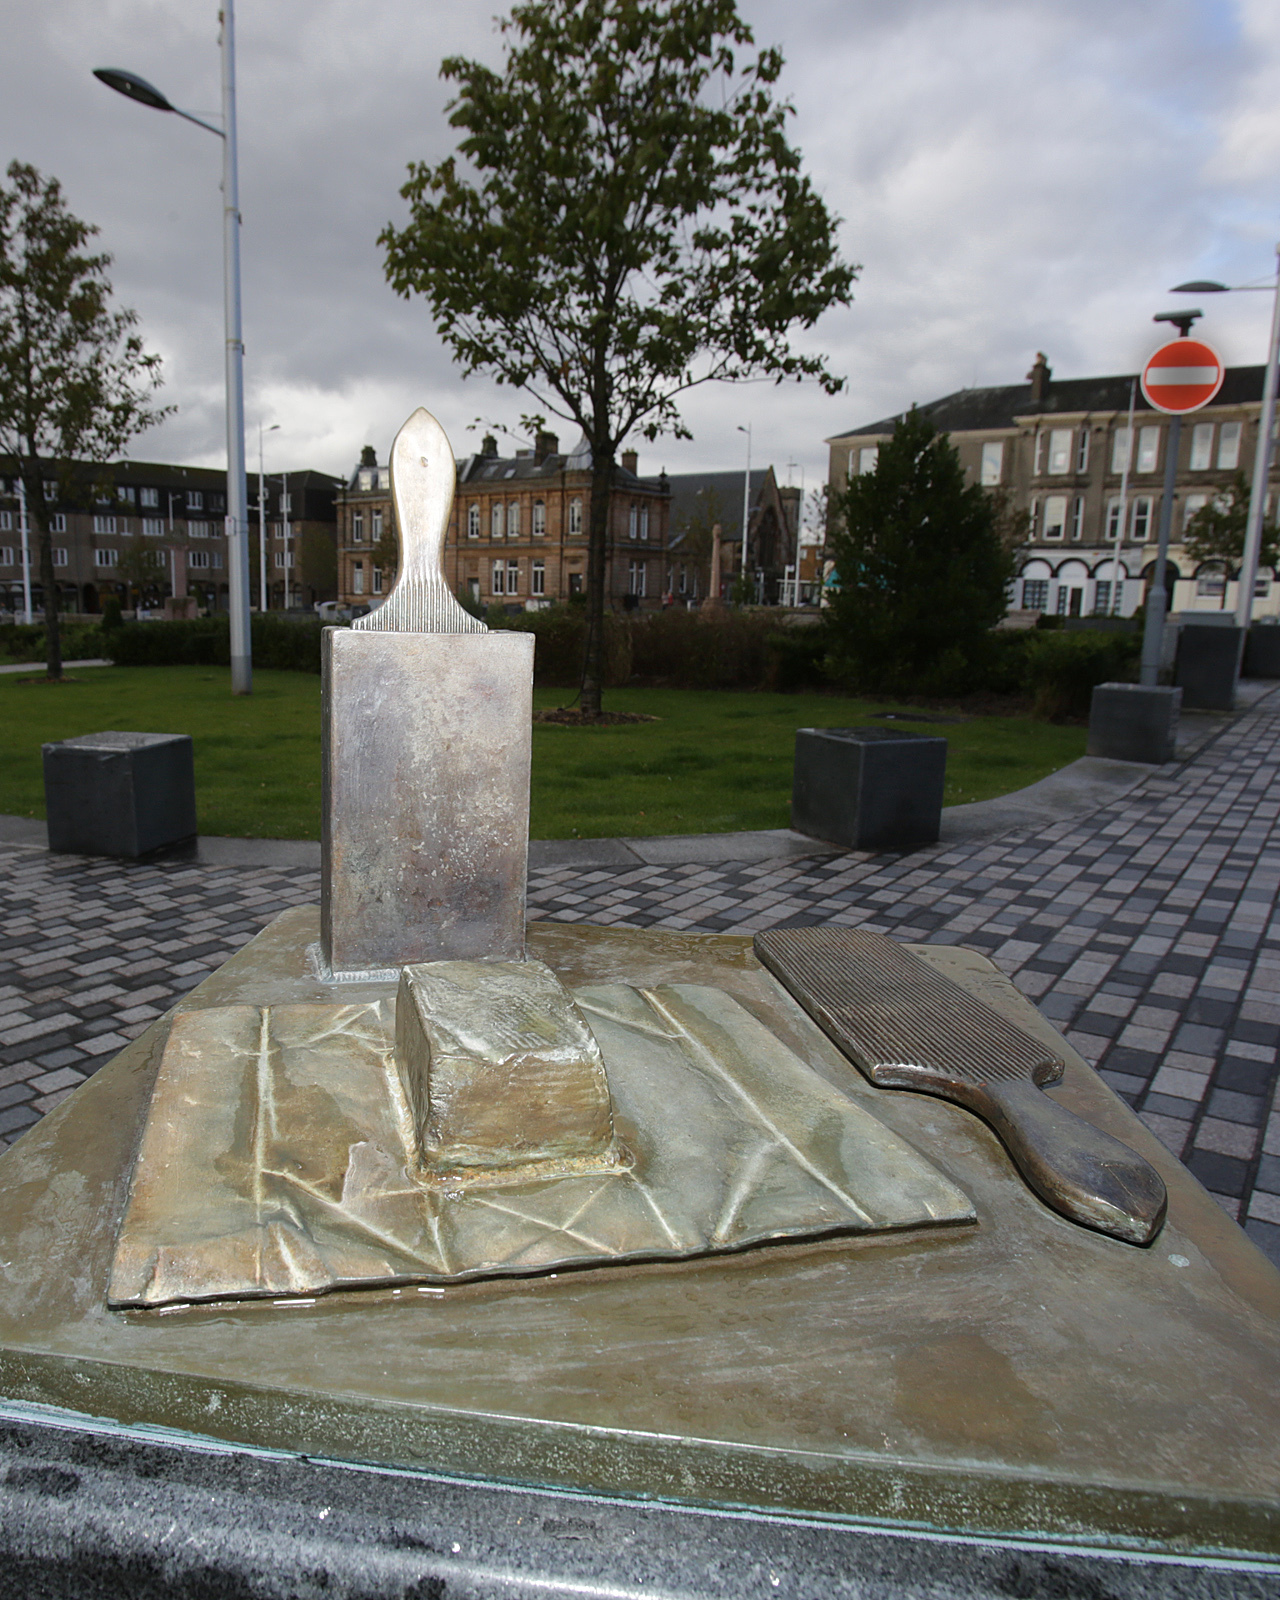 Helensburghs Outdoor Museum features a series of sculptures mounted on plinths around Colquhoun Square